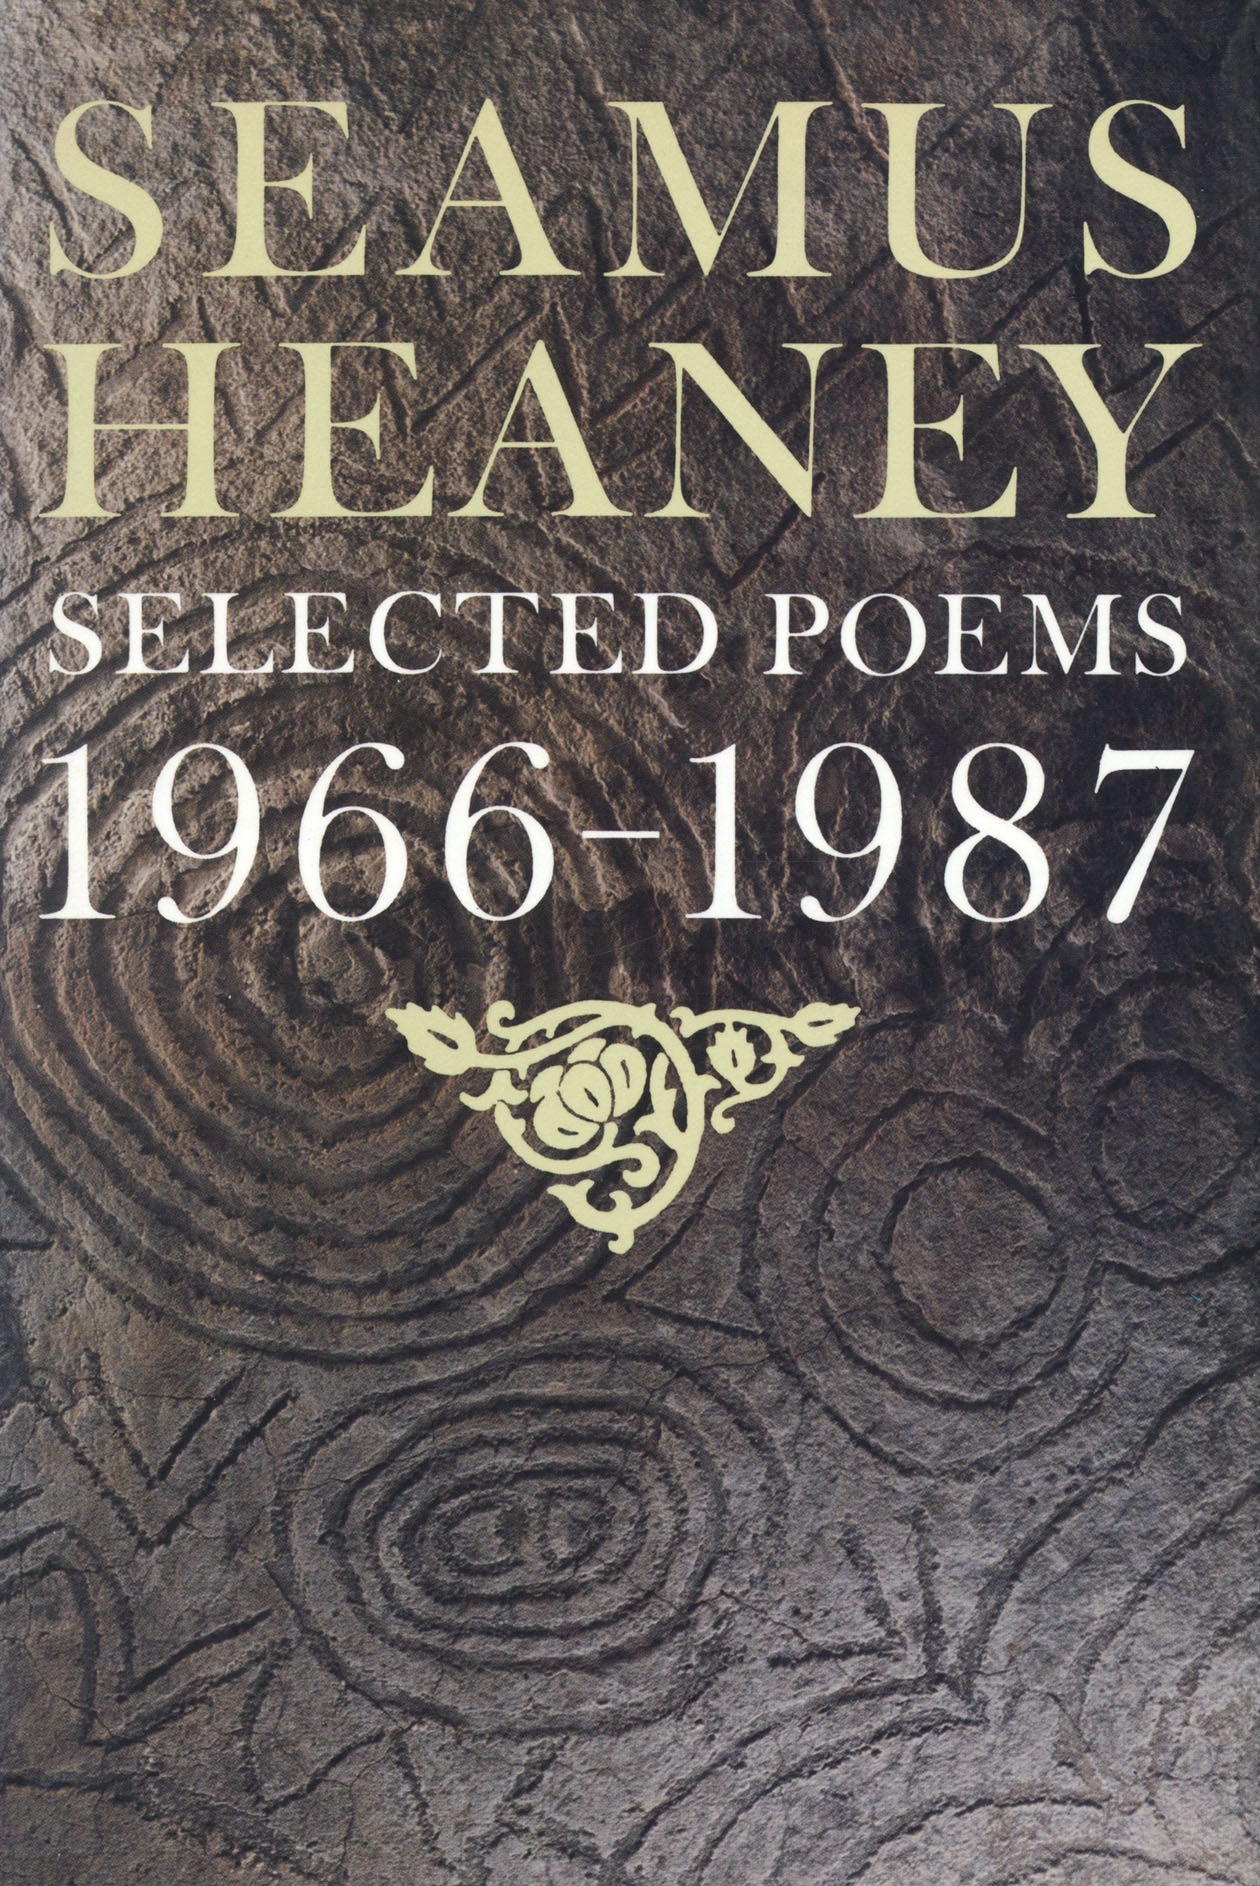 Selected Poems 1966–1987 by Seamus Heaney on Granary Books